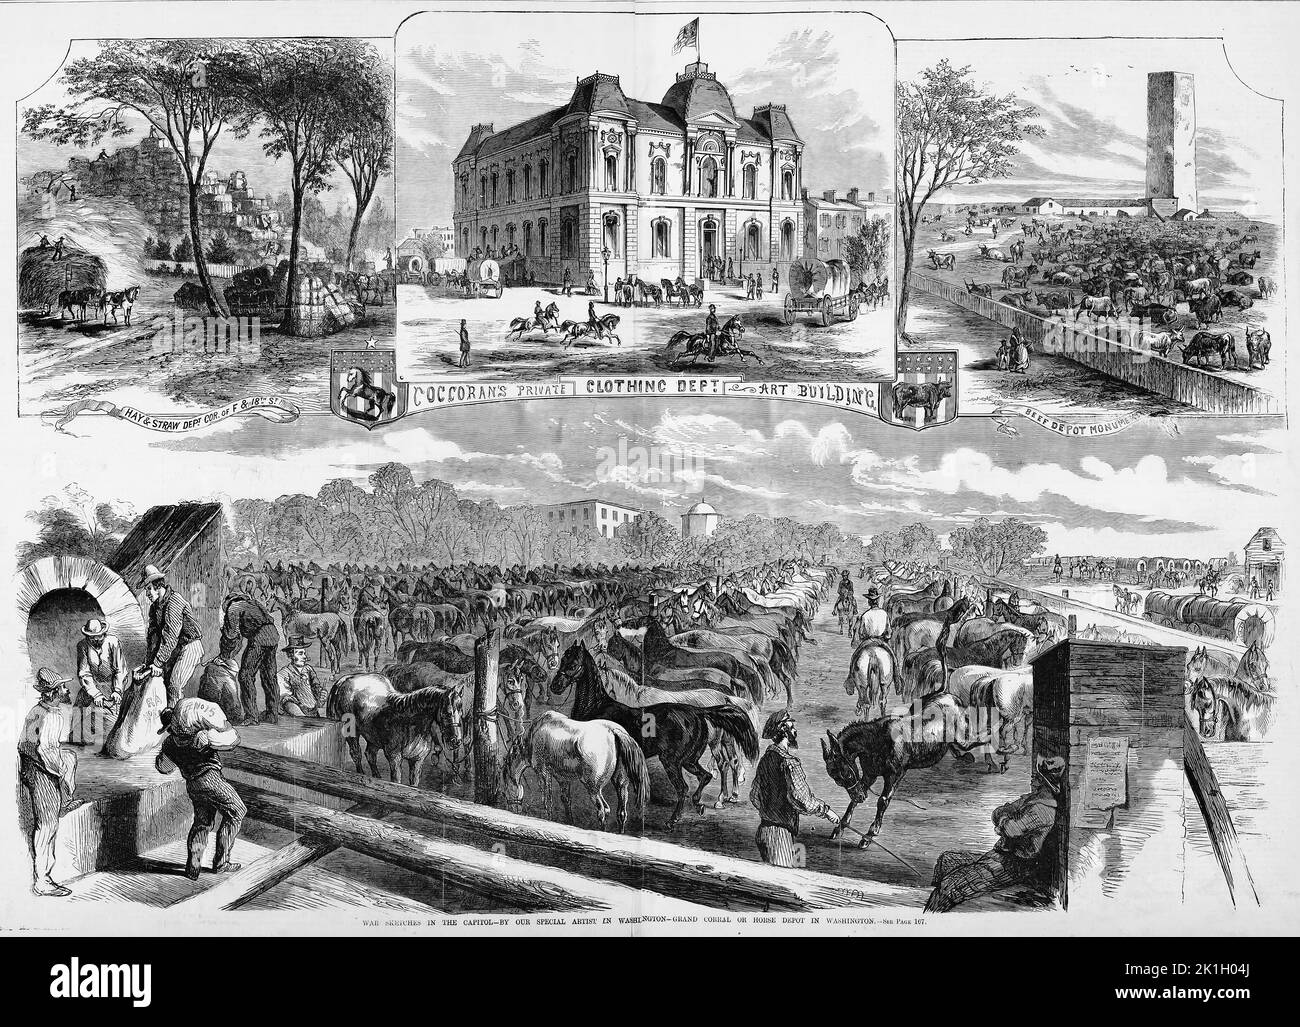 War sketches in the Capitol - Grand corral or horse depot in Washington - Hay and Straw Department corner of F and 18th Street - Coccoran's Private Clothing Department Art Building - Beef Depot Monument. January 1862. 19th century American Civil War illustration from Frank Leslie's Illustrated Newspaper Stock Photo